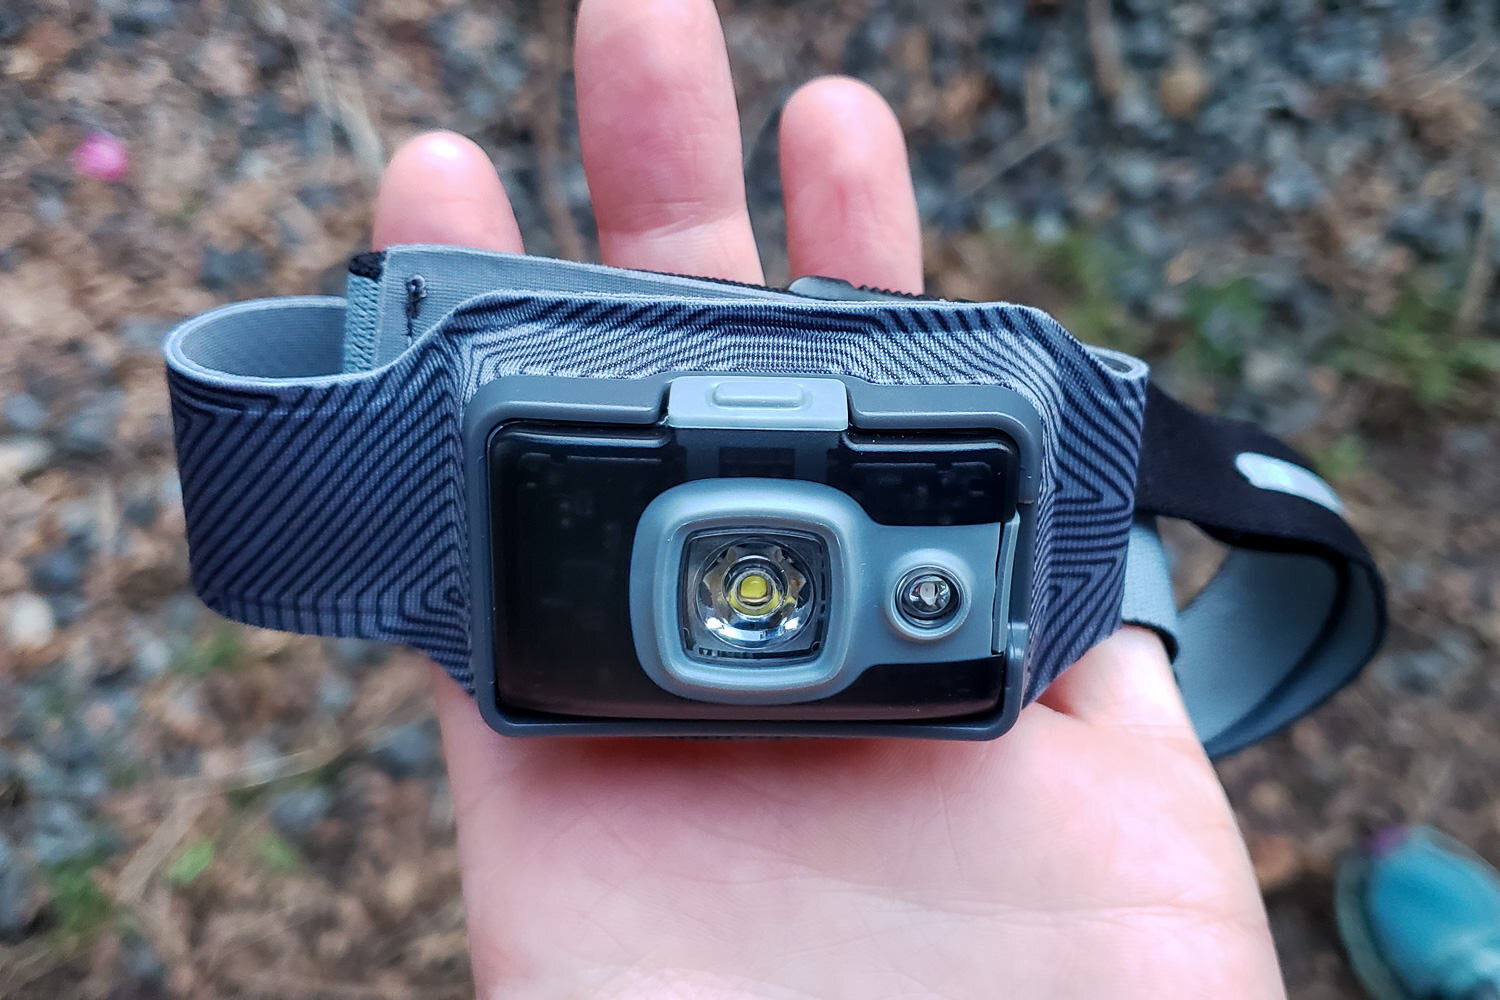 The BioLite HeadLamp 200 has a built-in rechargeable battery.